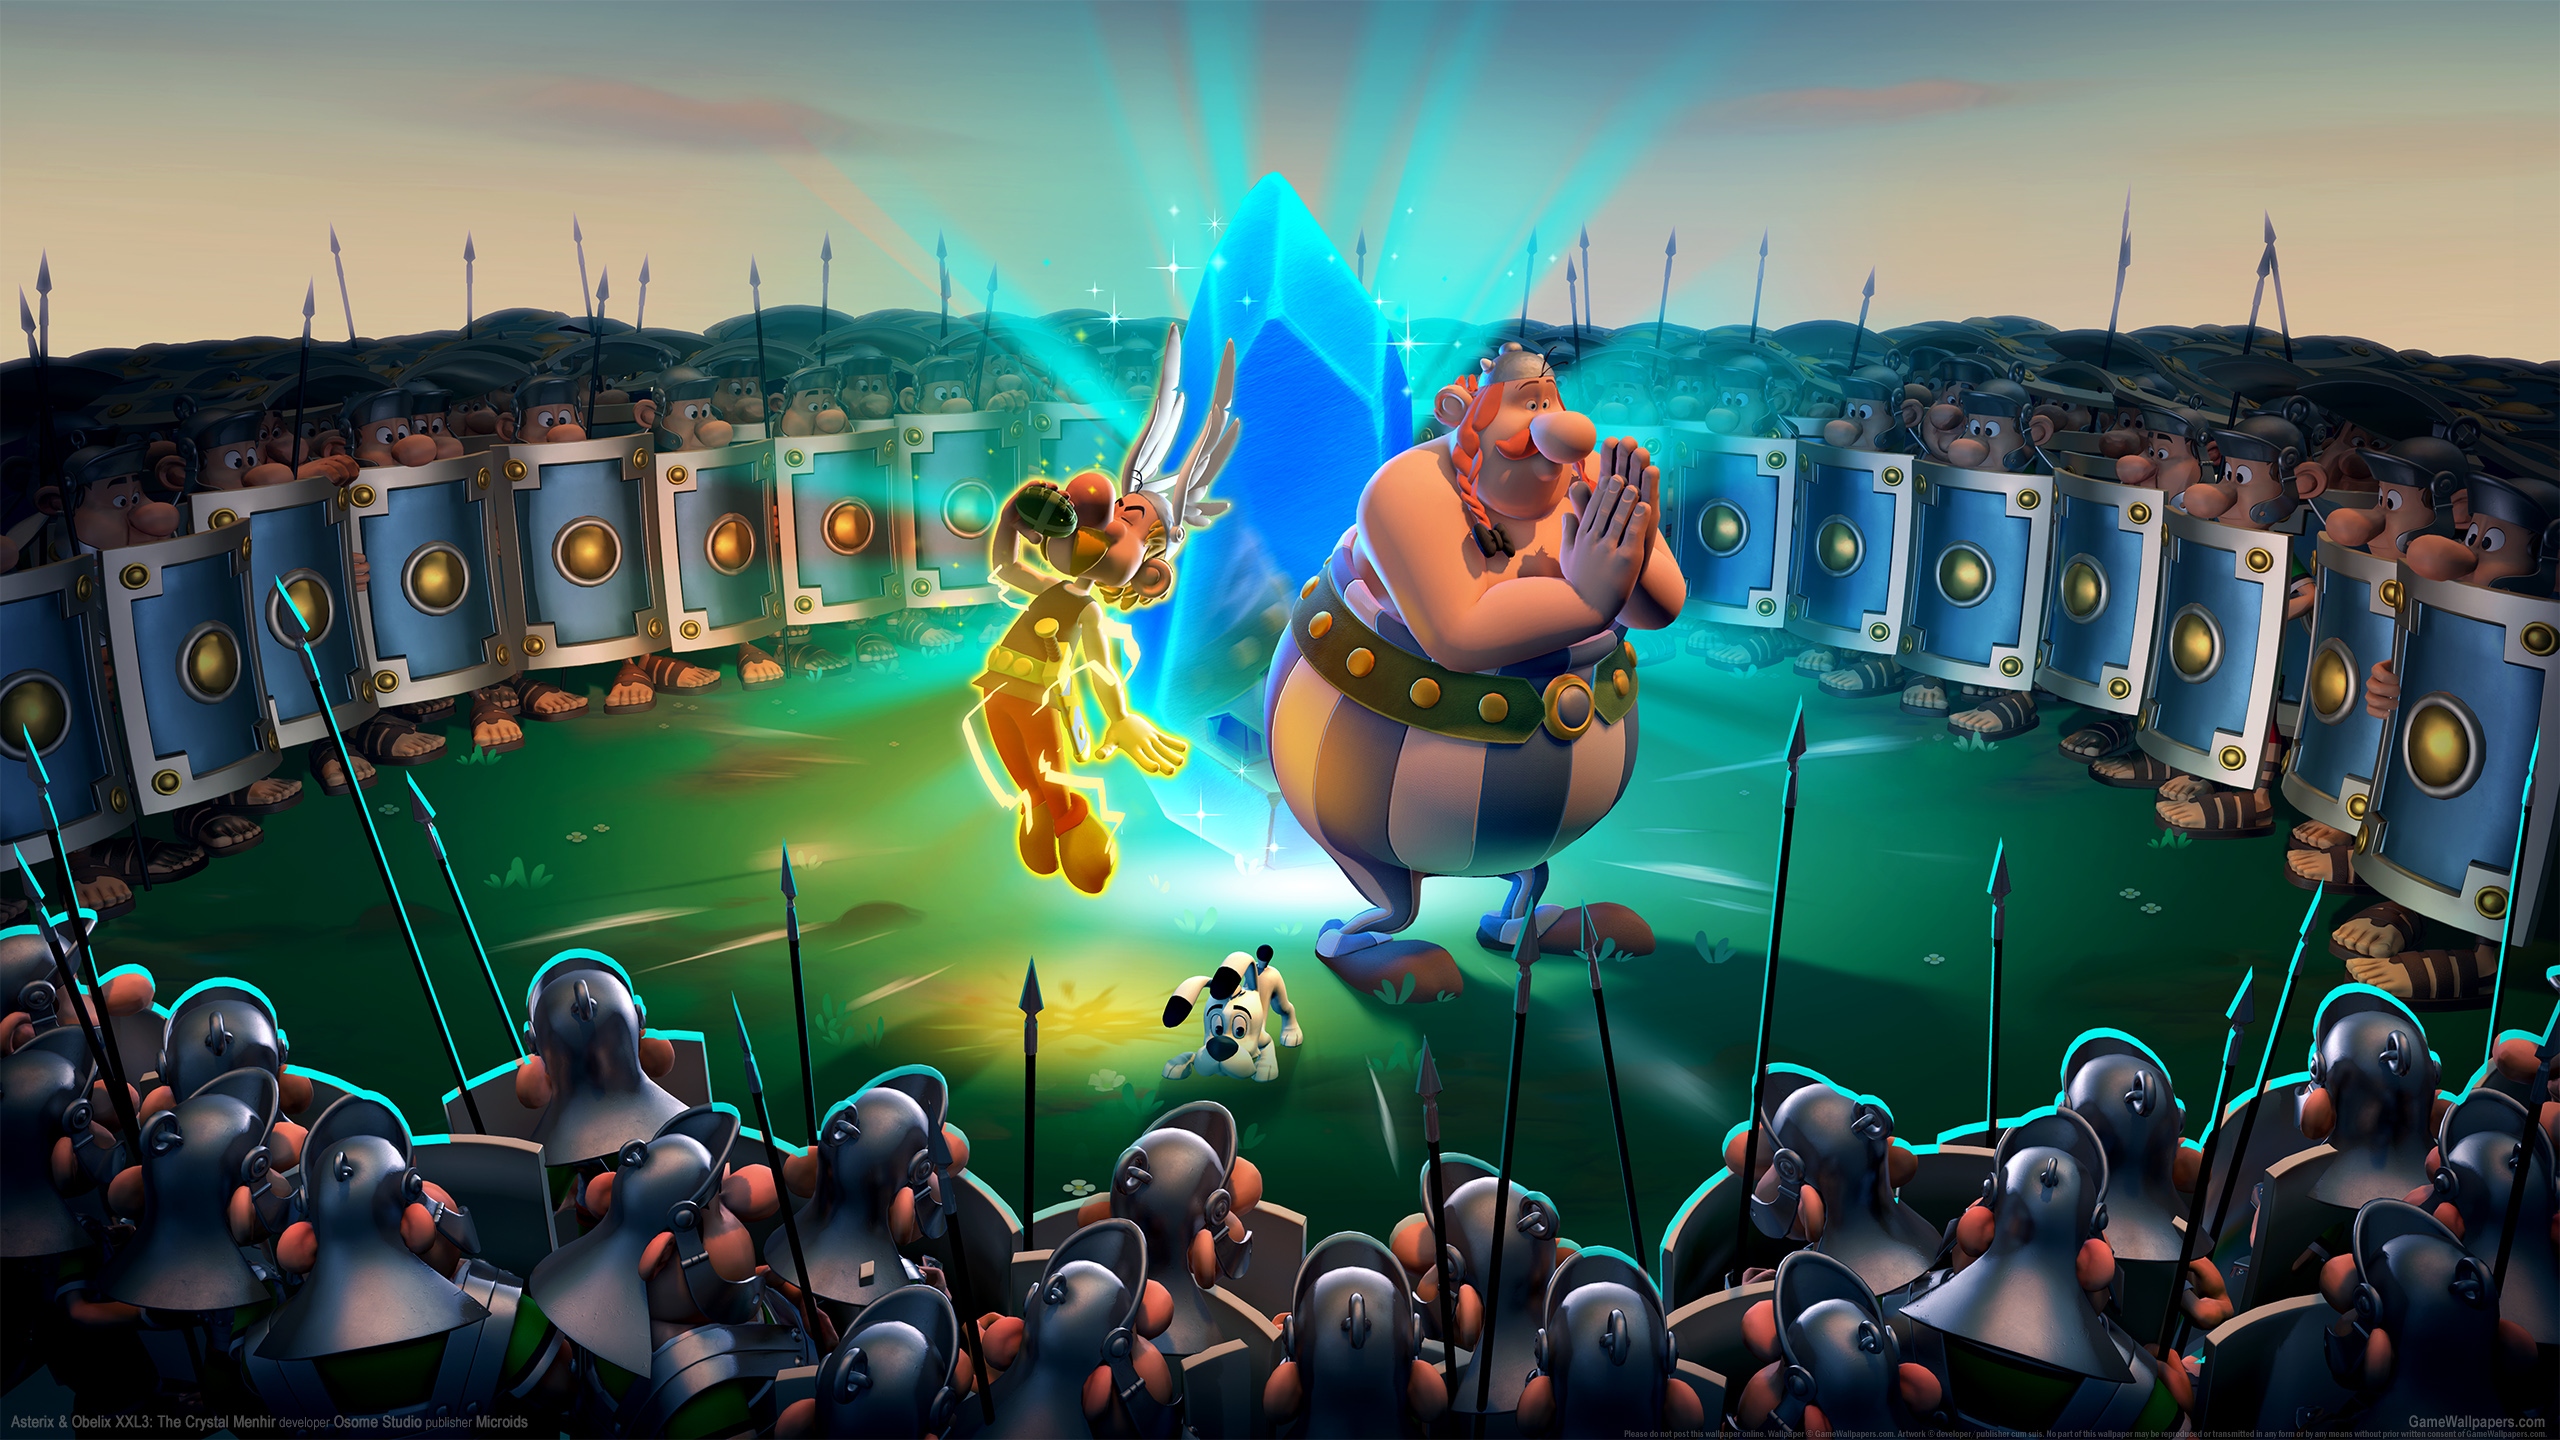 Asterix & Obelix XXL3: The Crystal Menhir 2560x1440 wallpaper or background 01